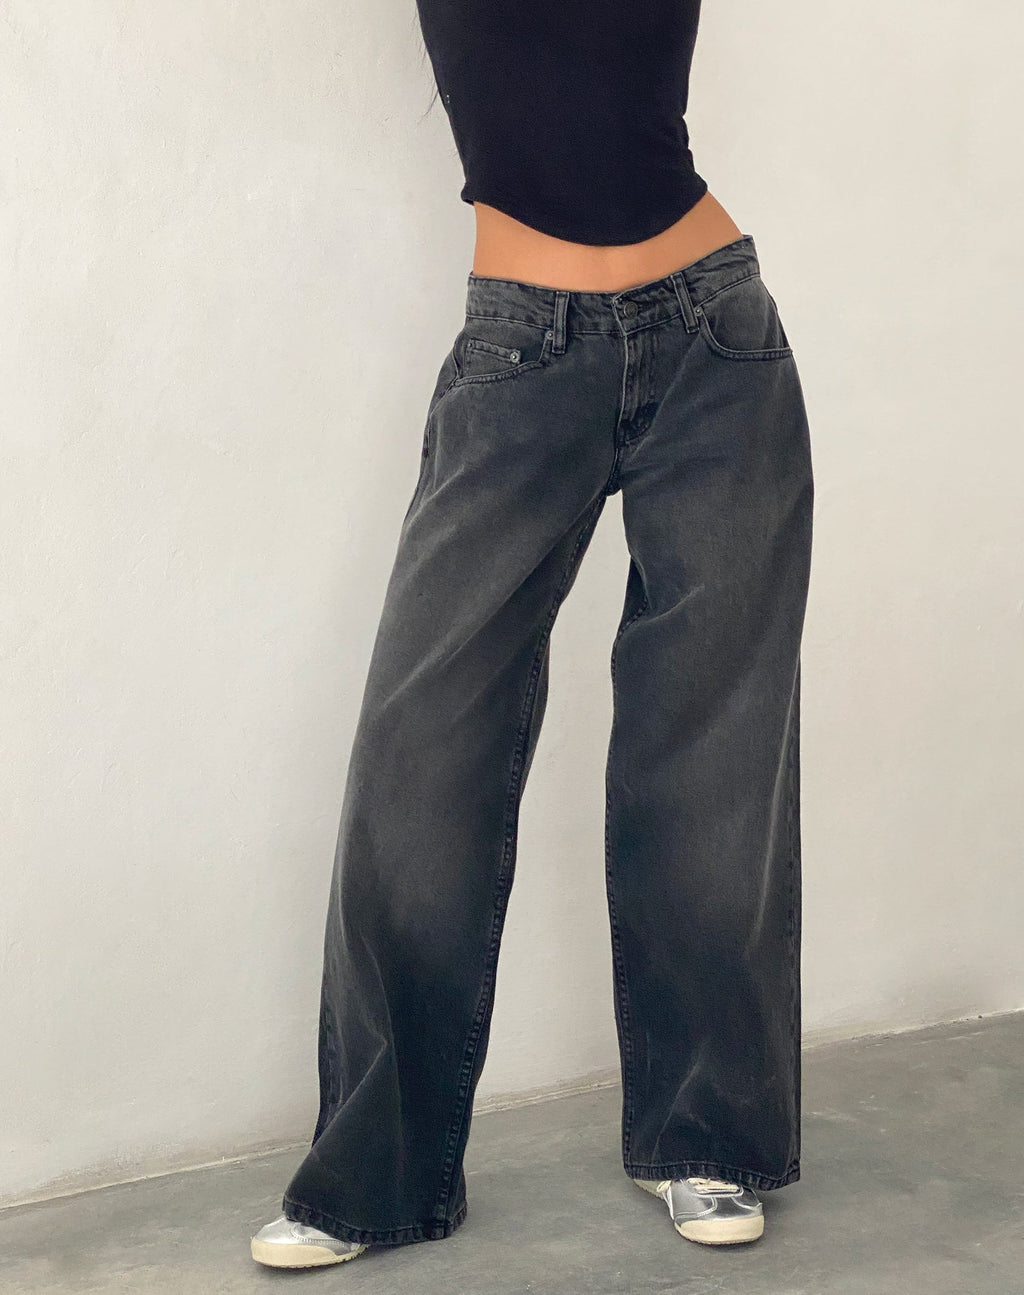 Geräumige Extra Wide Low Rise Jeans in Washed Black Grey